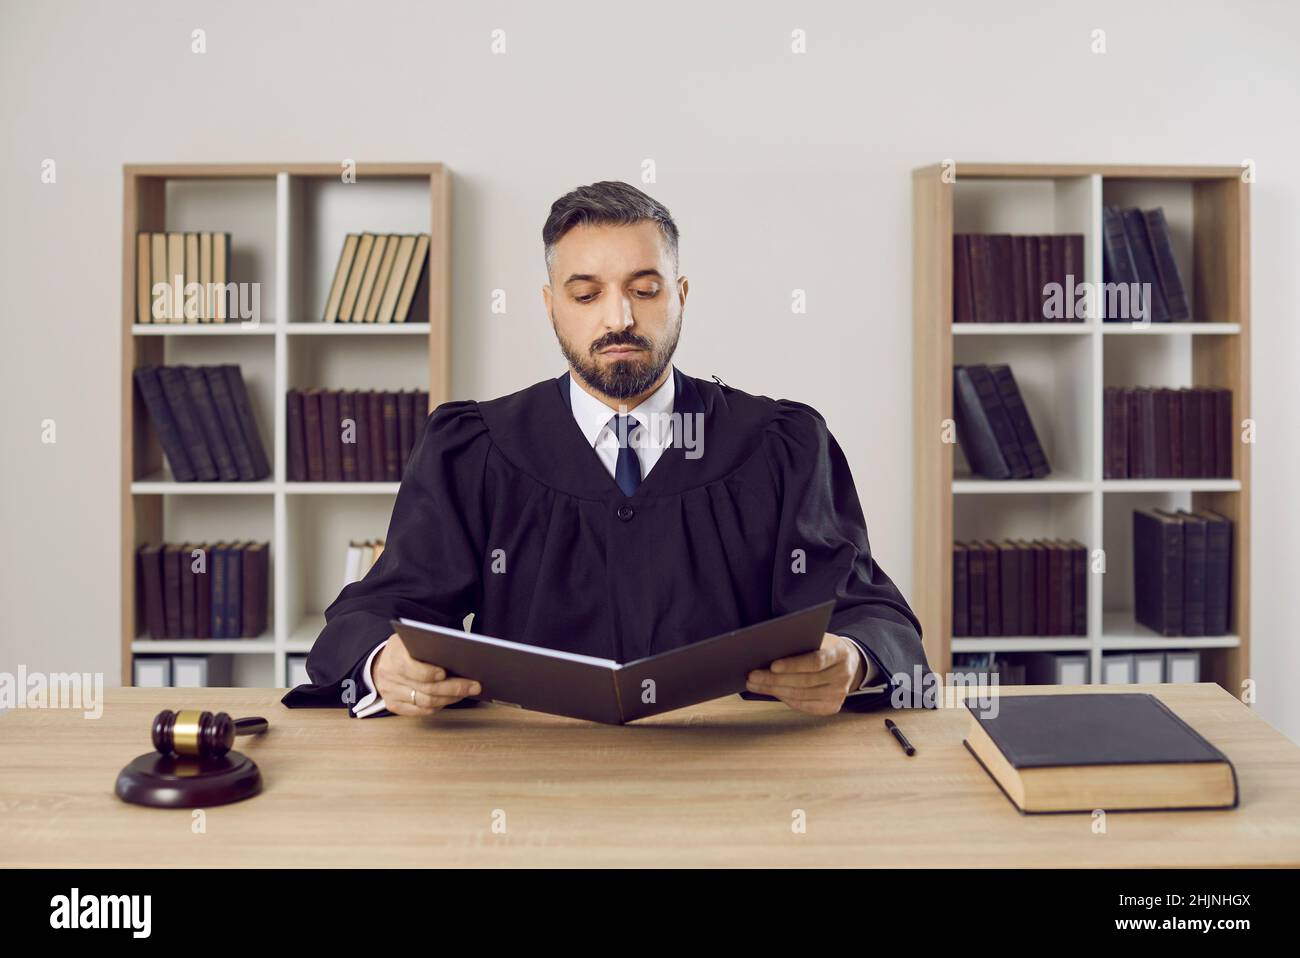 Serious male judge reads legal documents on case sitting at table in his office. Stock Photo